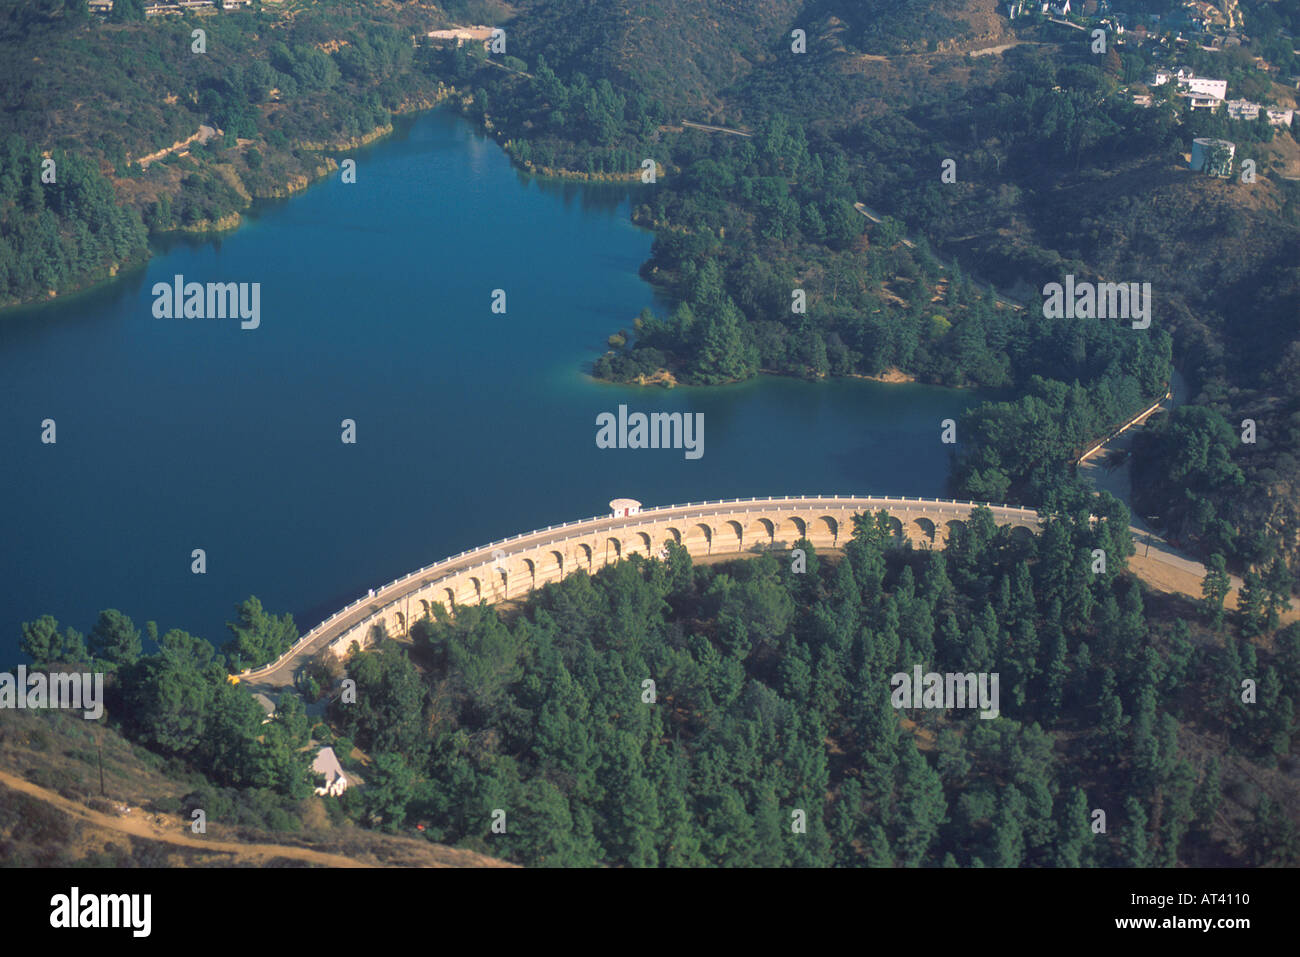 Lake Hollywood Dam in Los Angeles California The dam serves as flood control and reservoir  Stock Photo